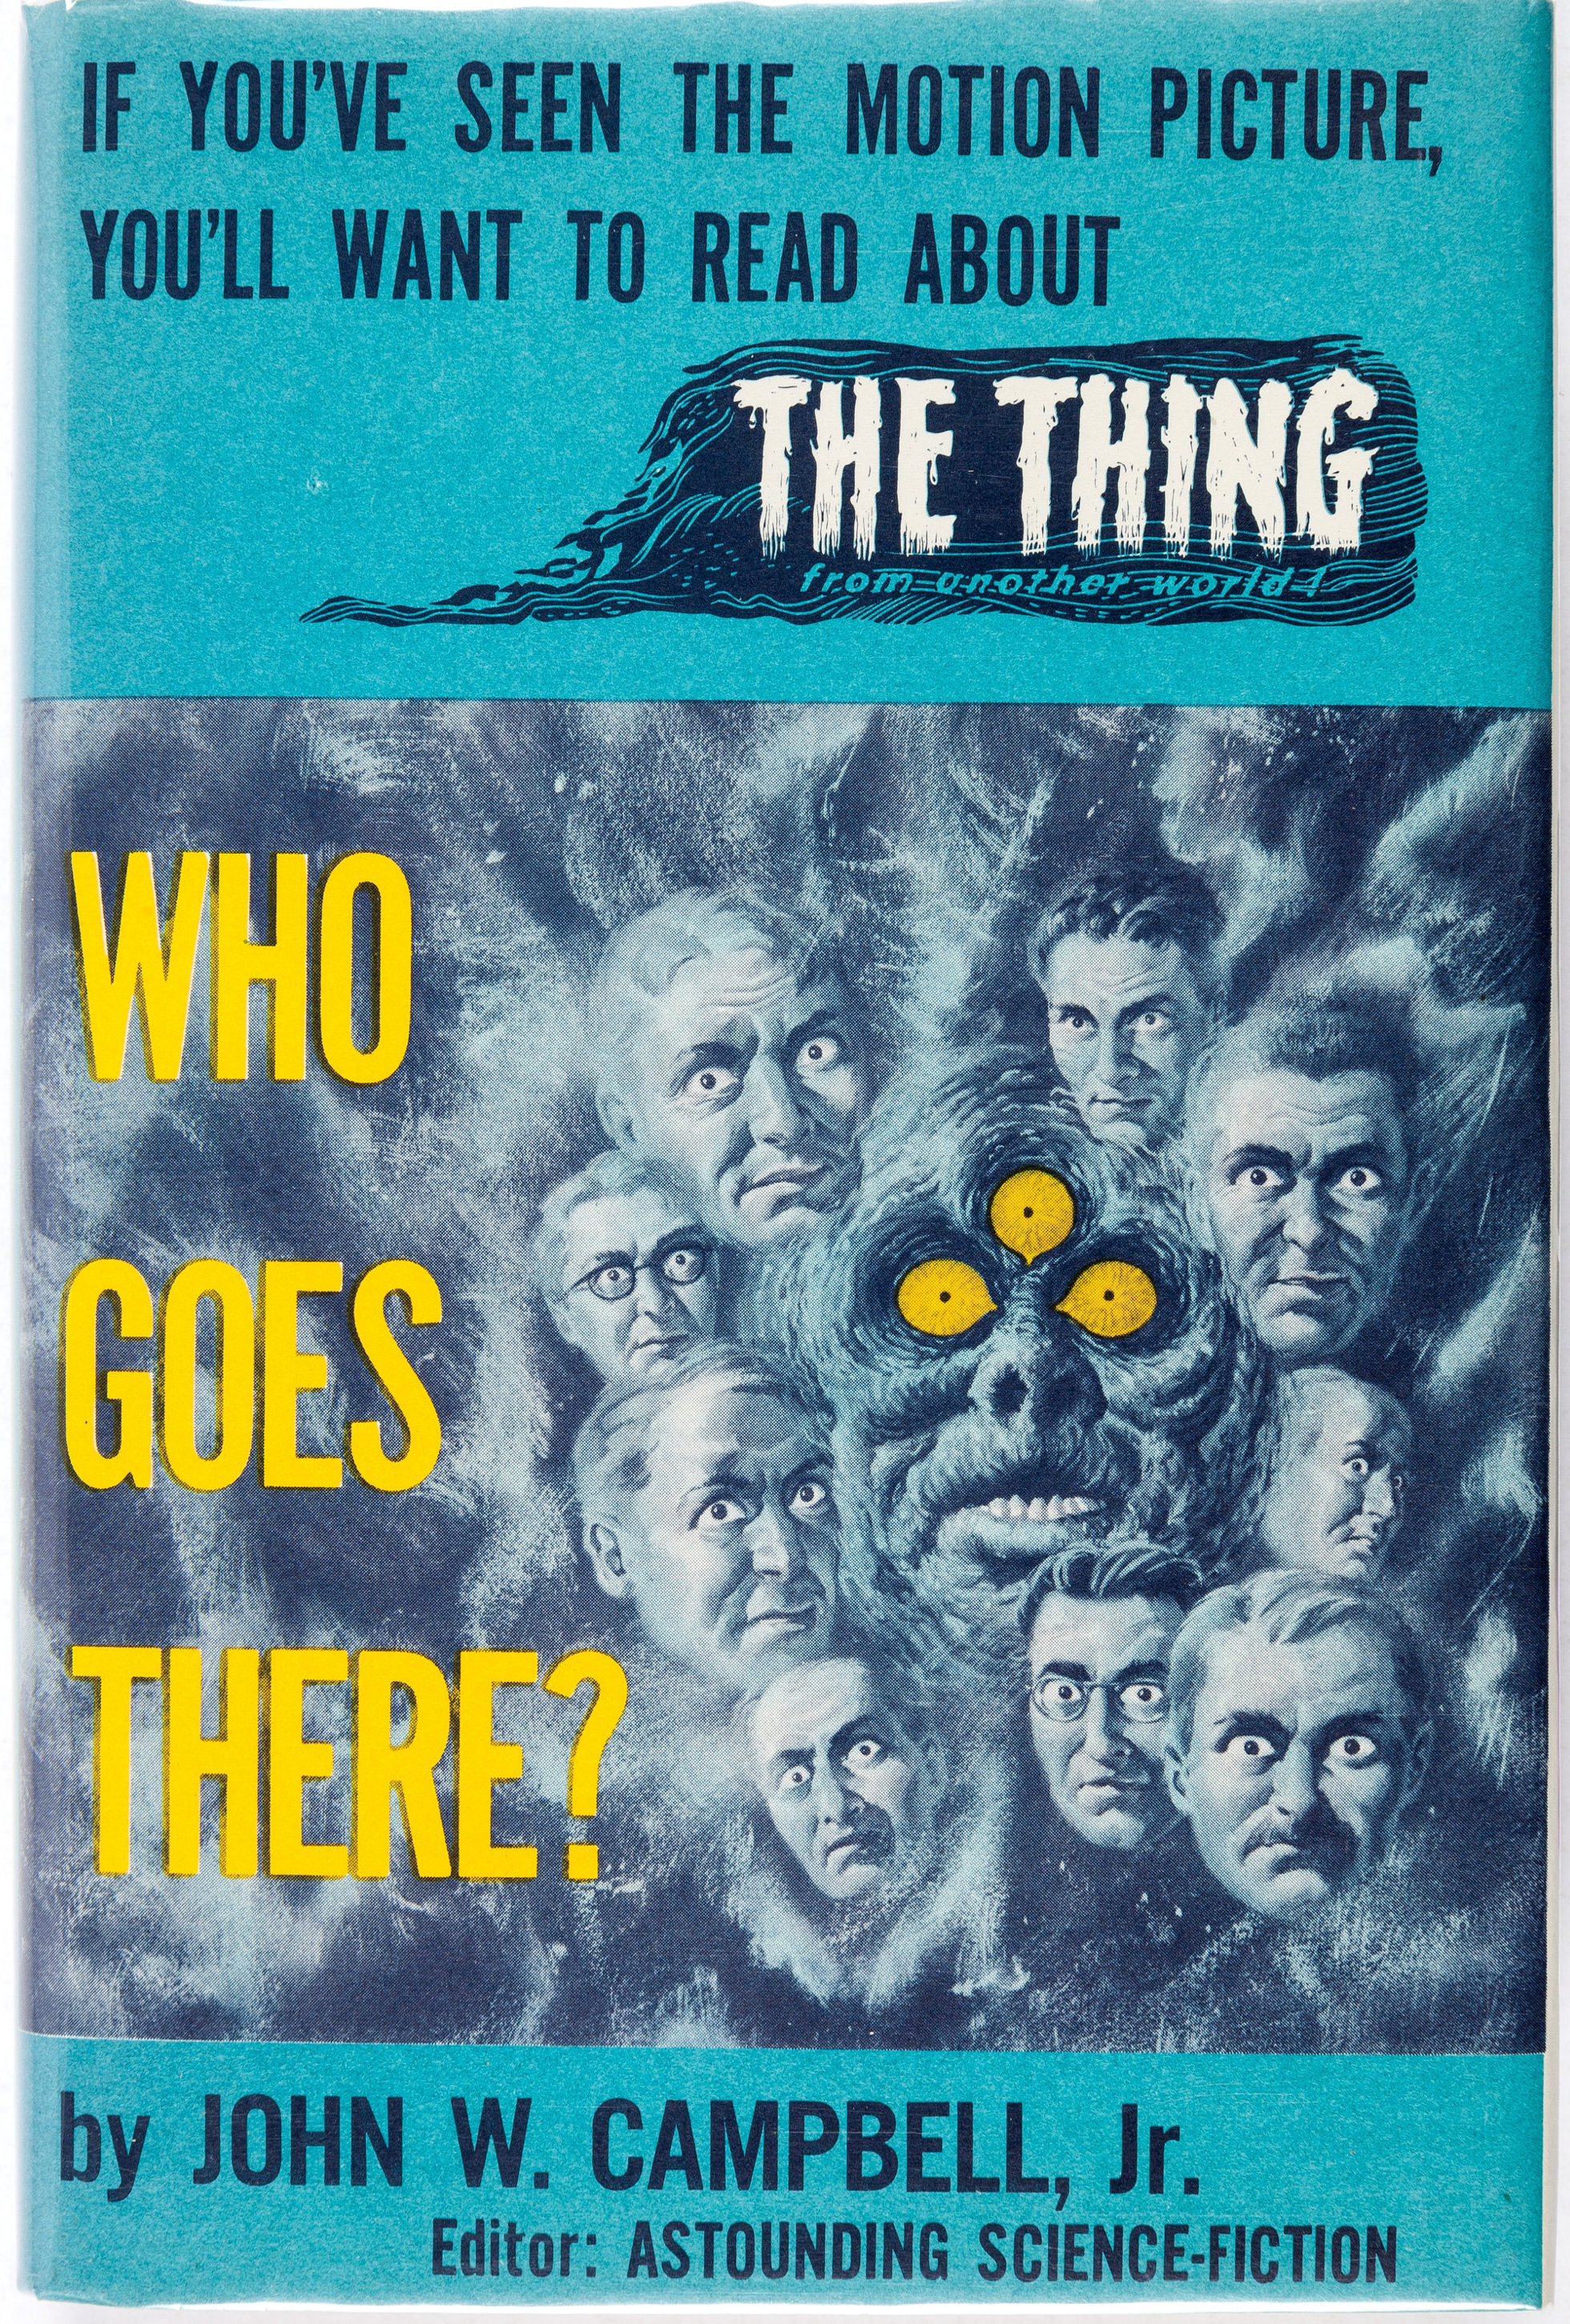 Who Goes There? ala The Thing from Another World by John W. Campbell Jr. book cover